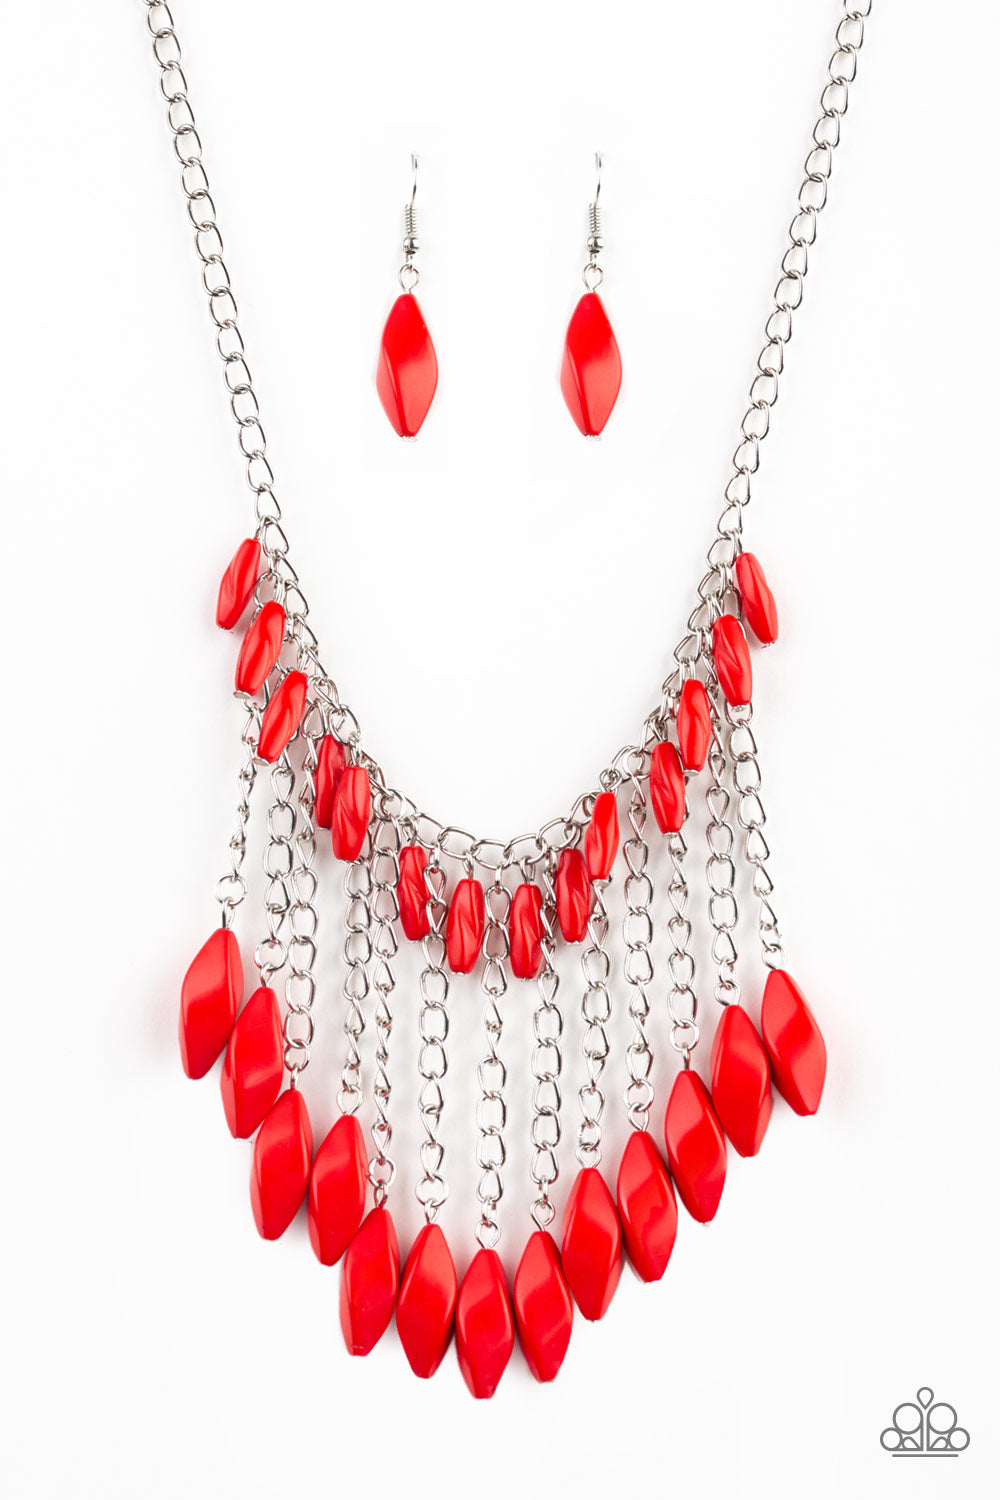 Venturous Vibes Necklace (Green, Red, Silver)